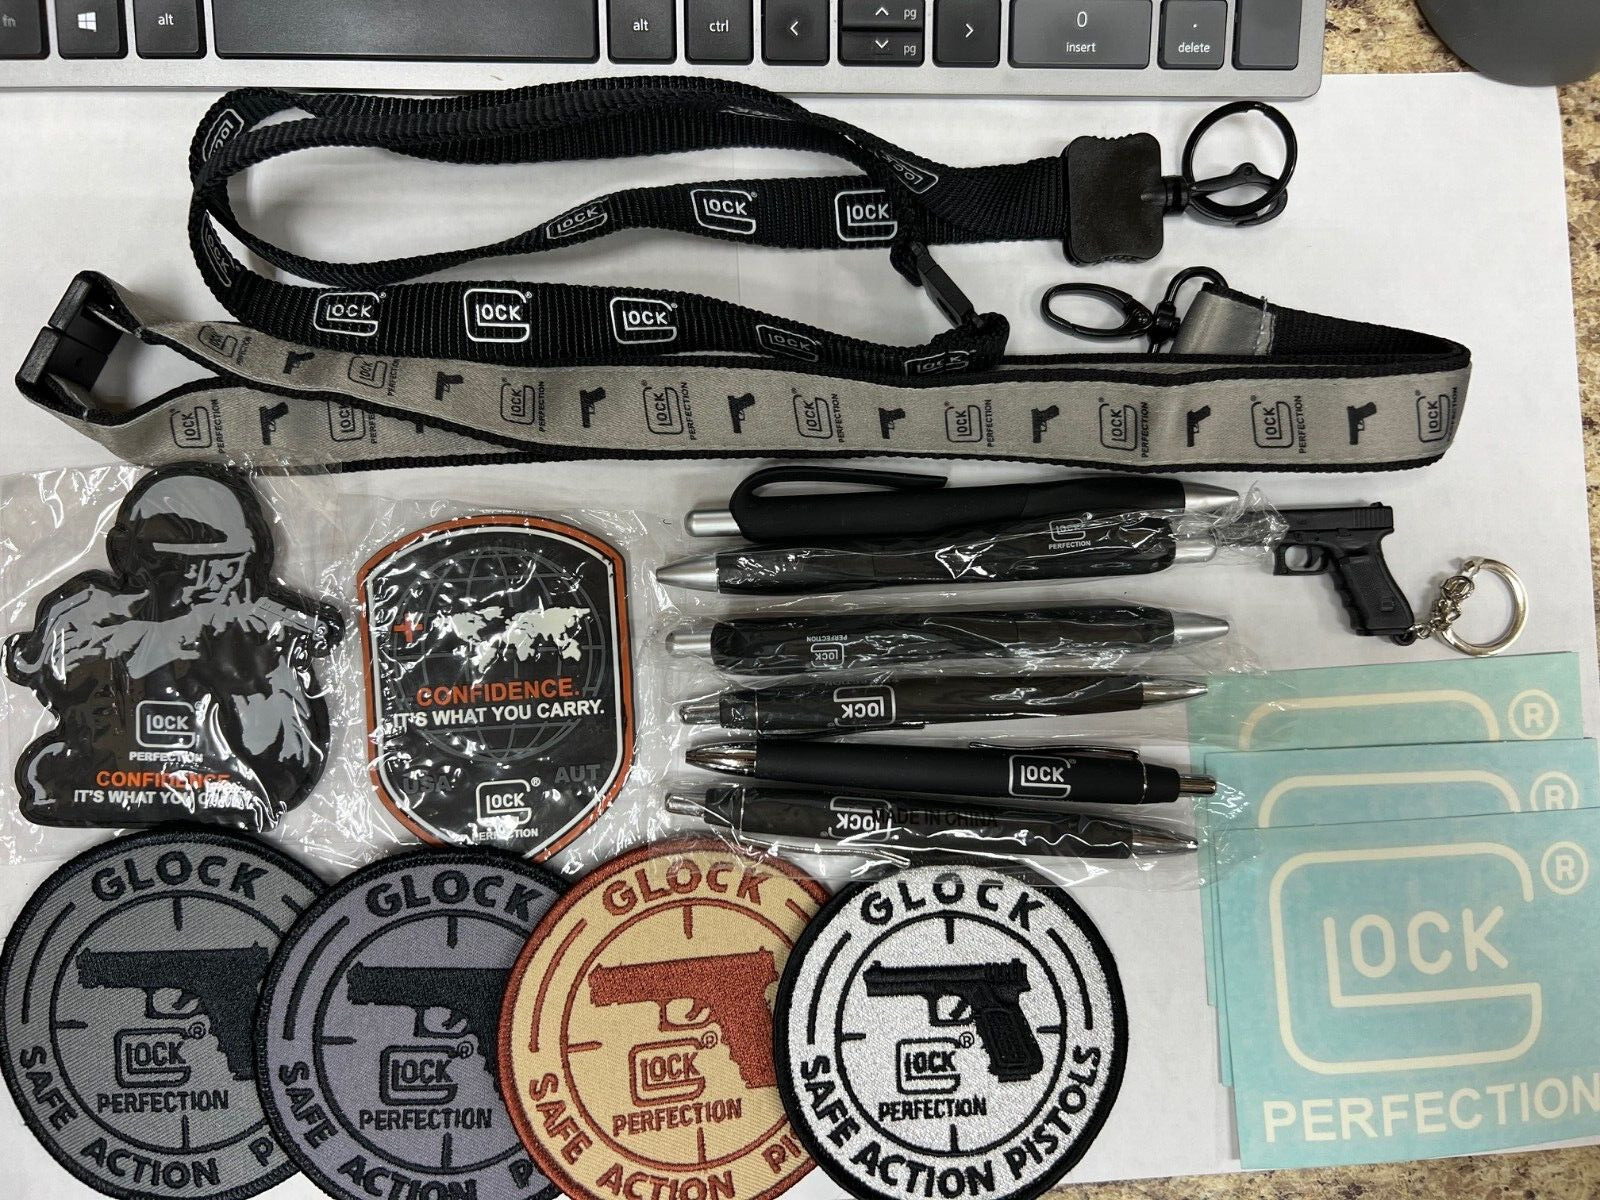 GLOCK PERFECTION SWAG Set 2 Lanyard, 6 Pen, 1 Keychain, 3 Sticker, 6 Patch NEW 